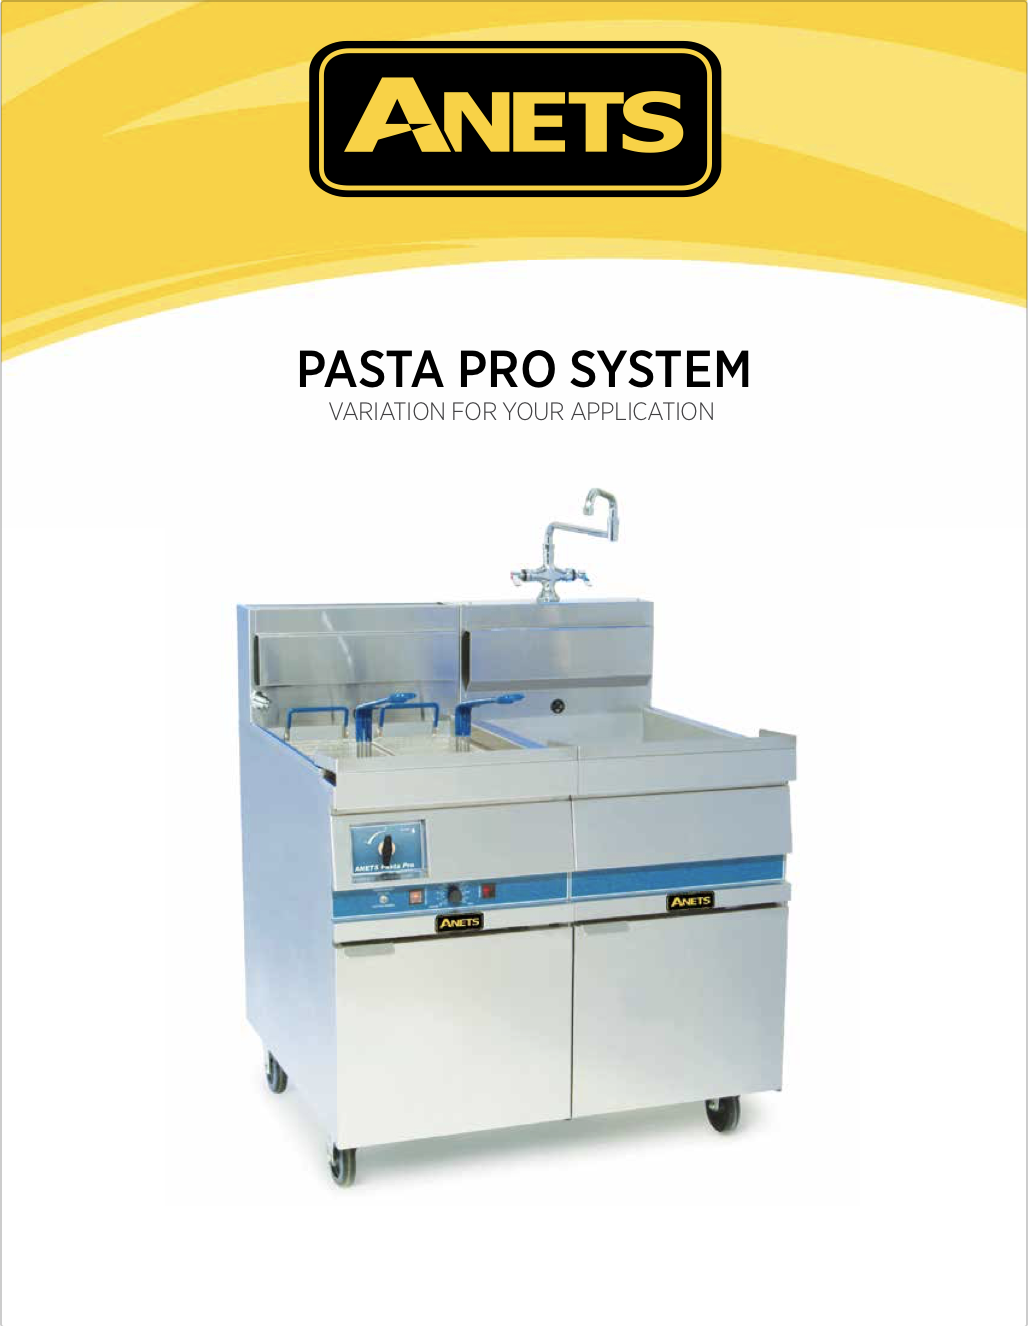 Anets Pasta Pro System